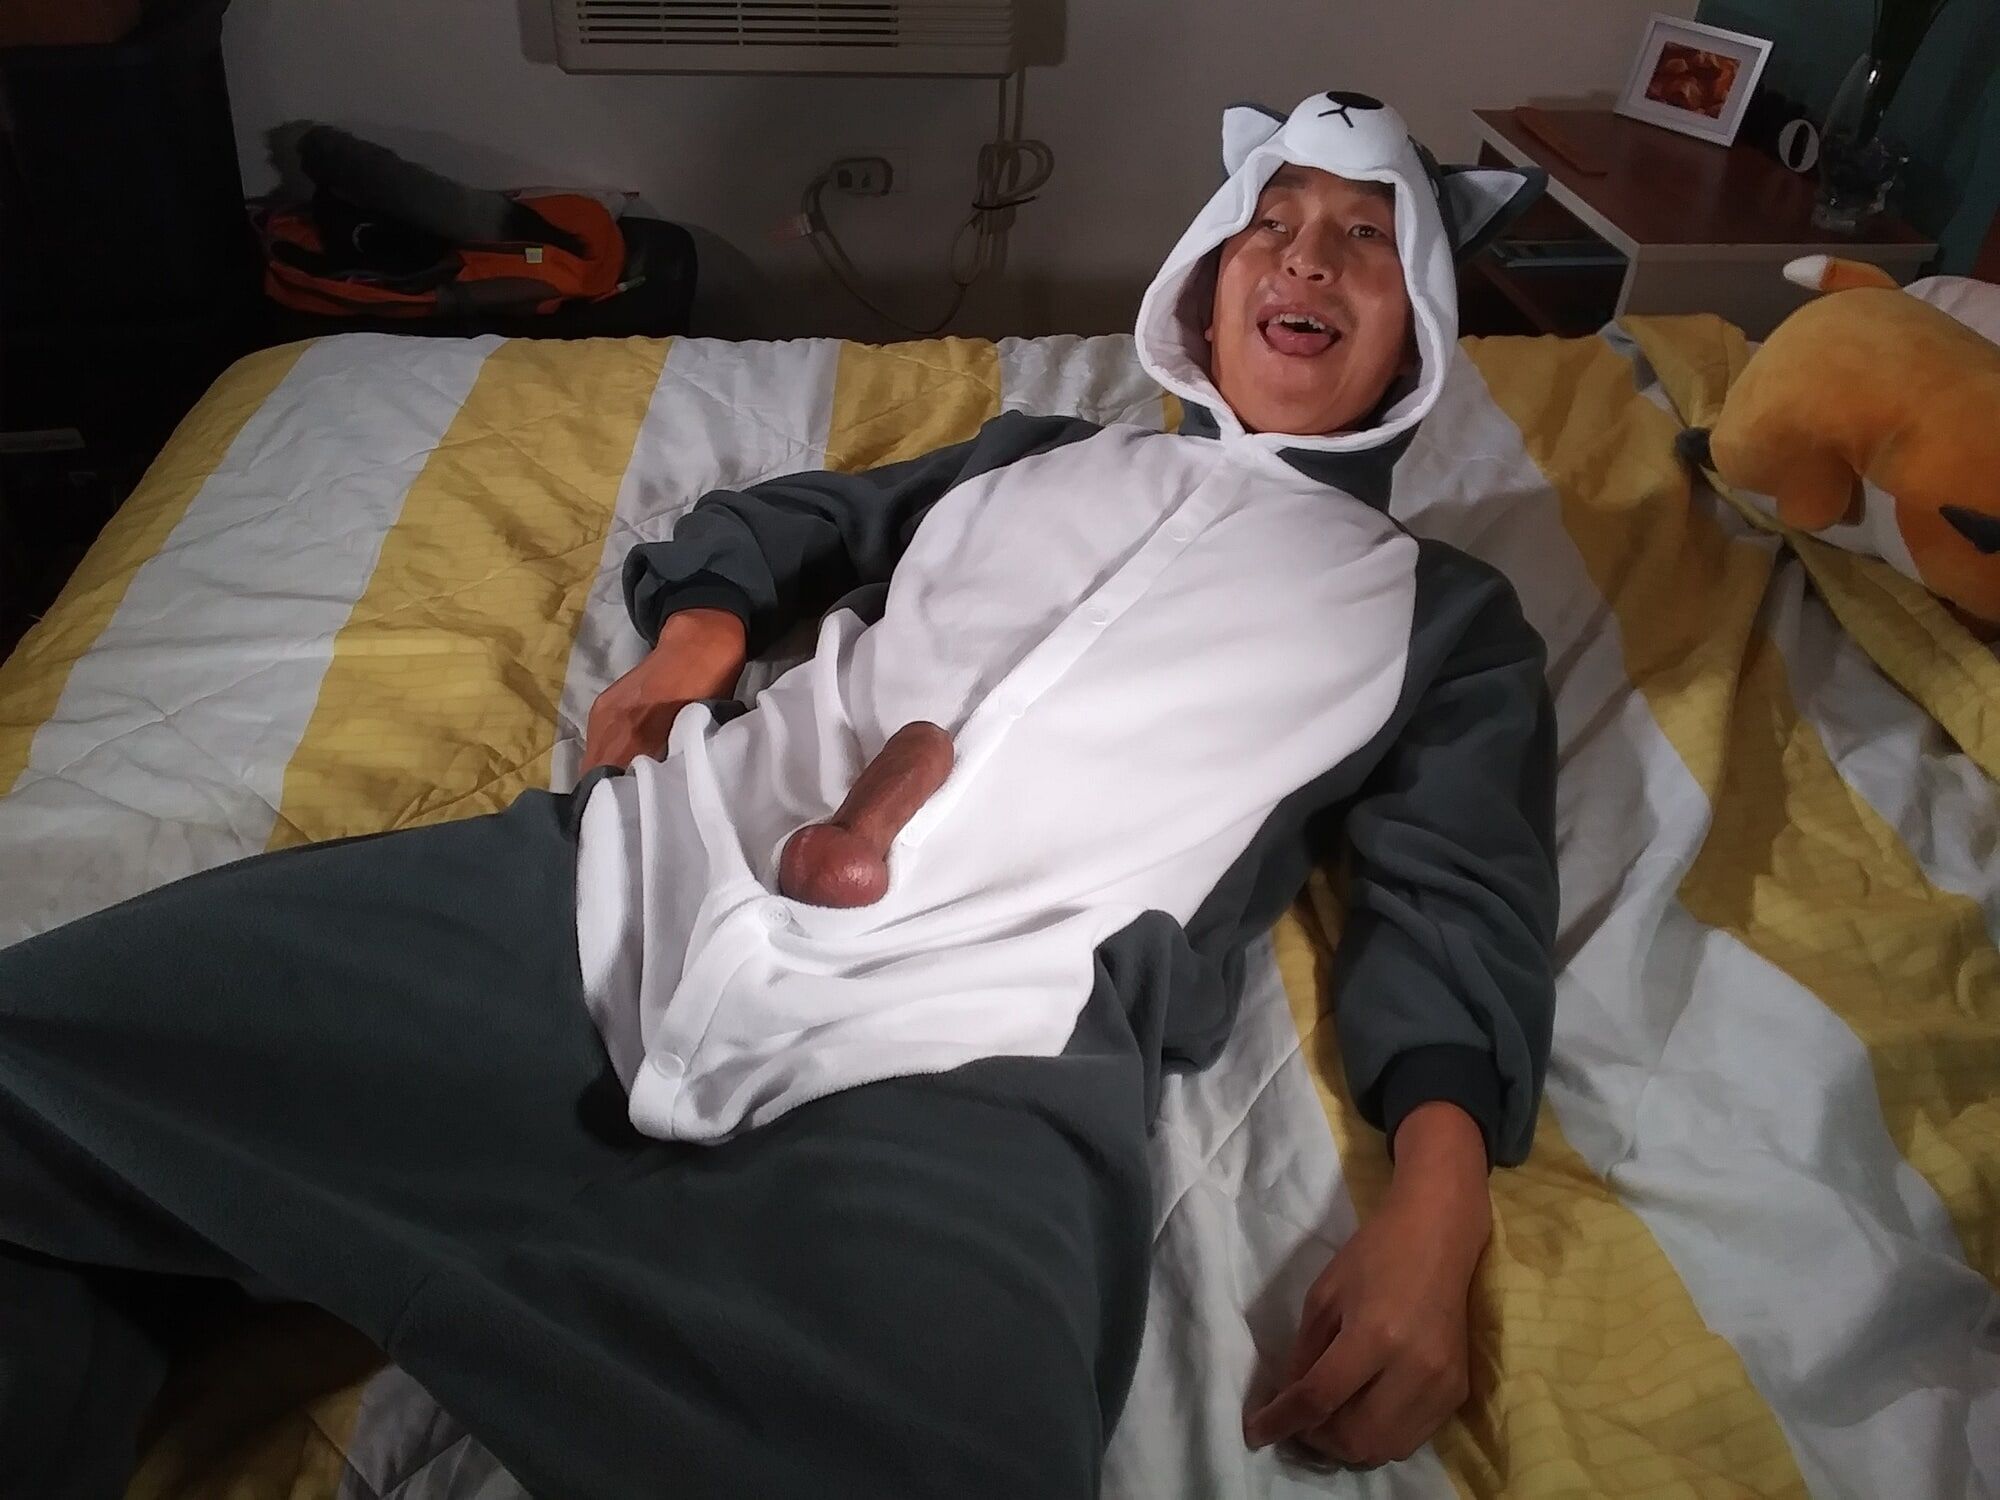 Hot asian boy wearing furry onesies and shiny undies #55